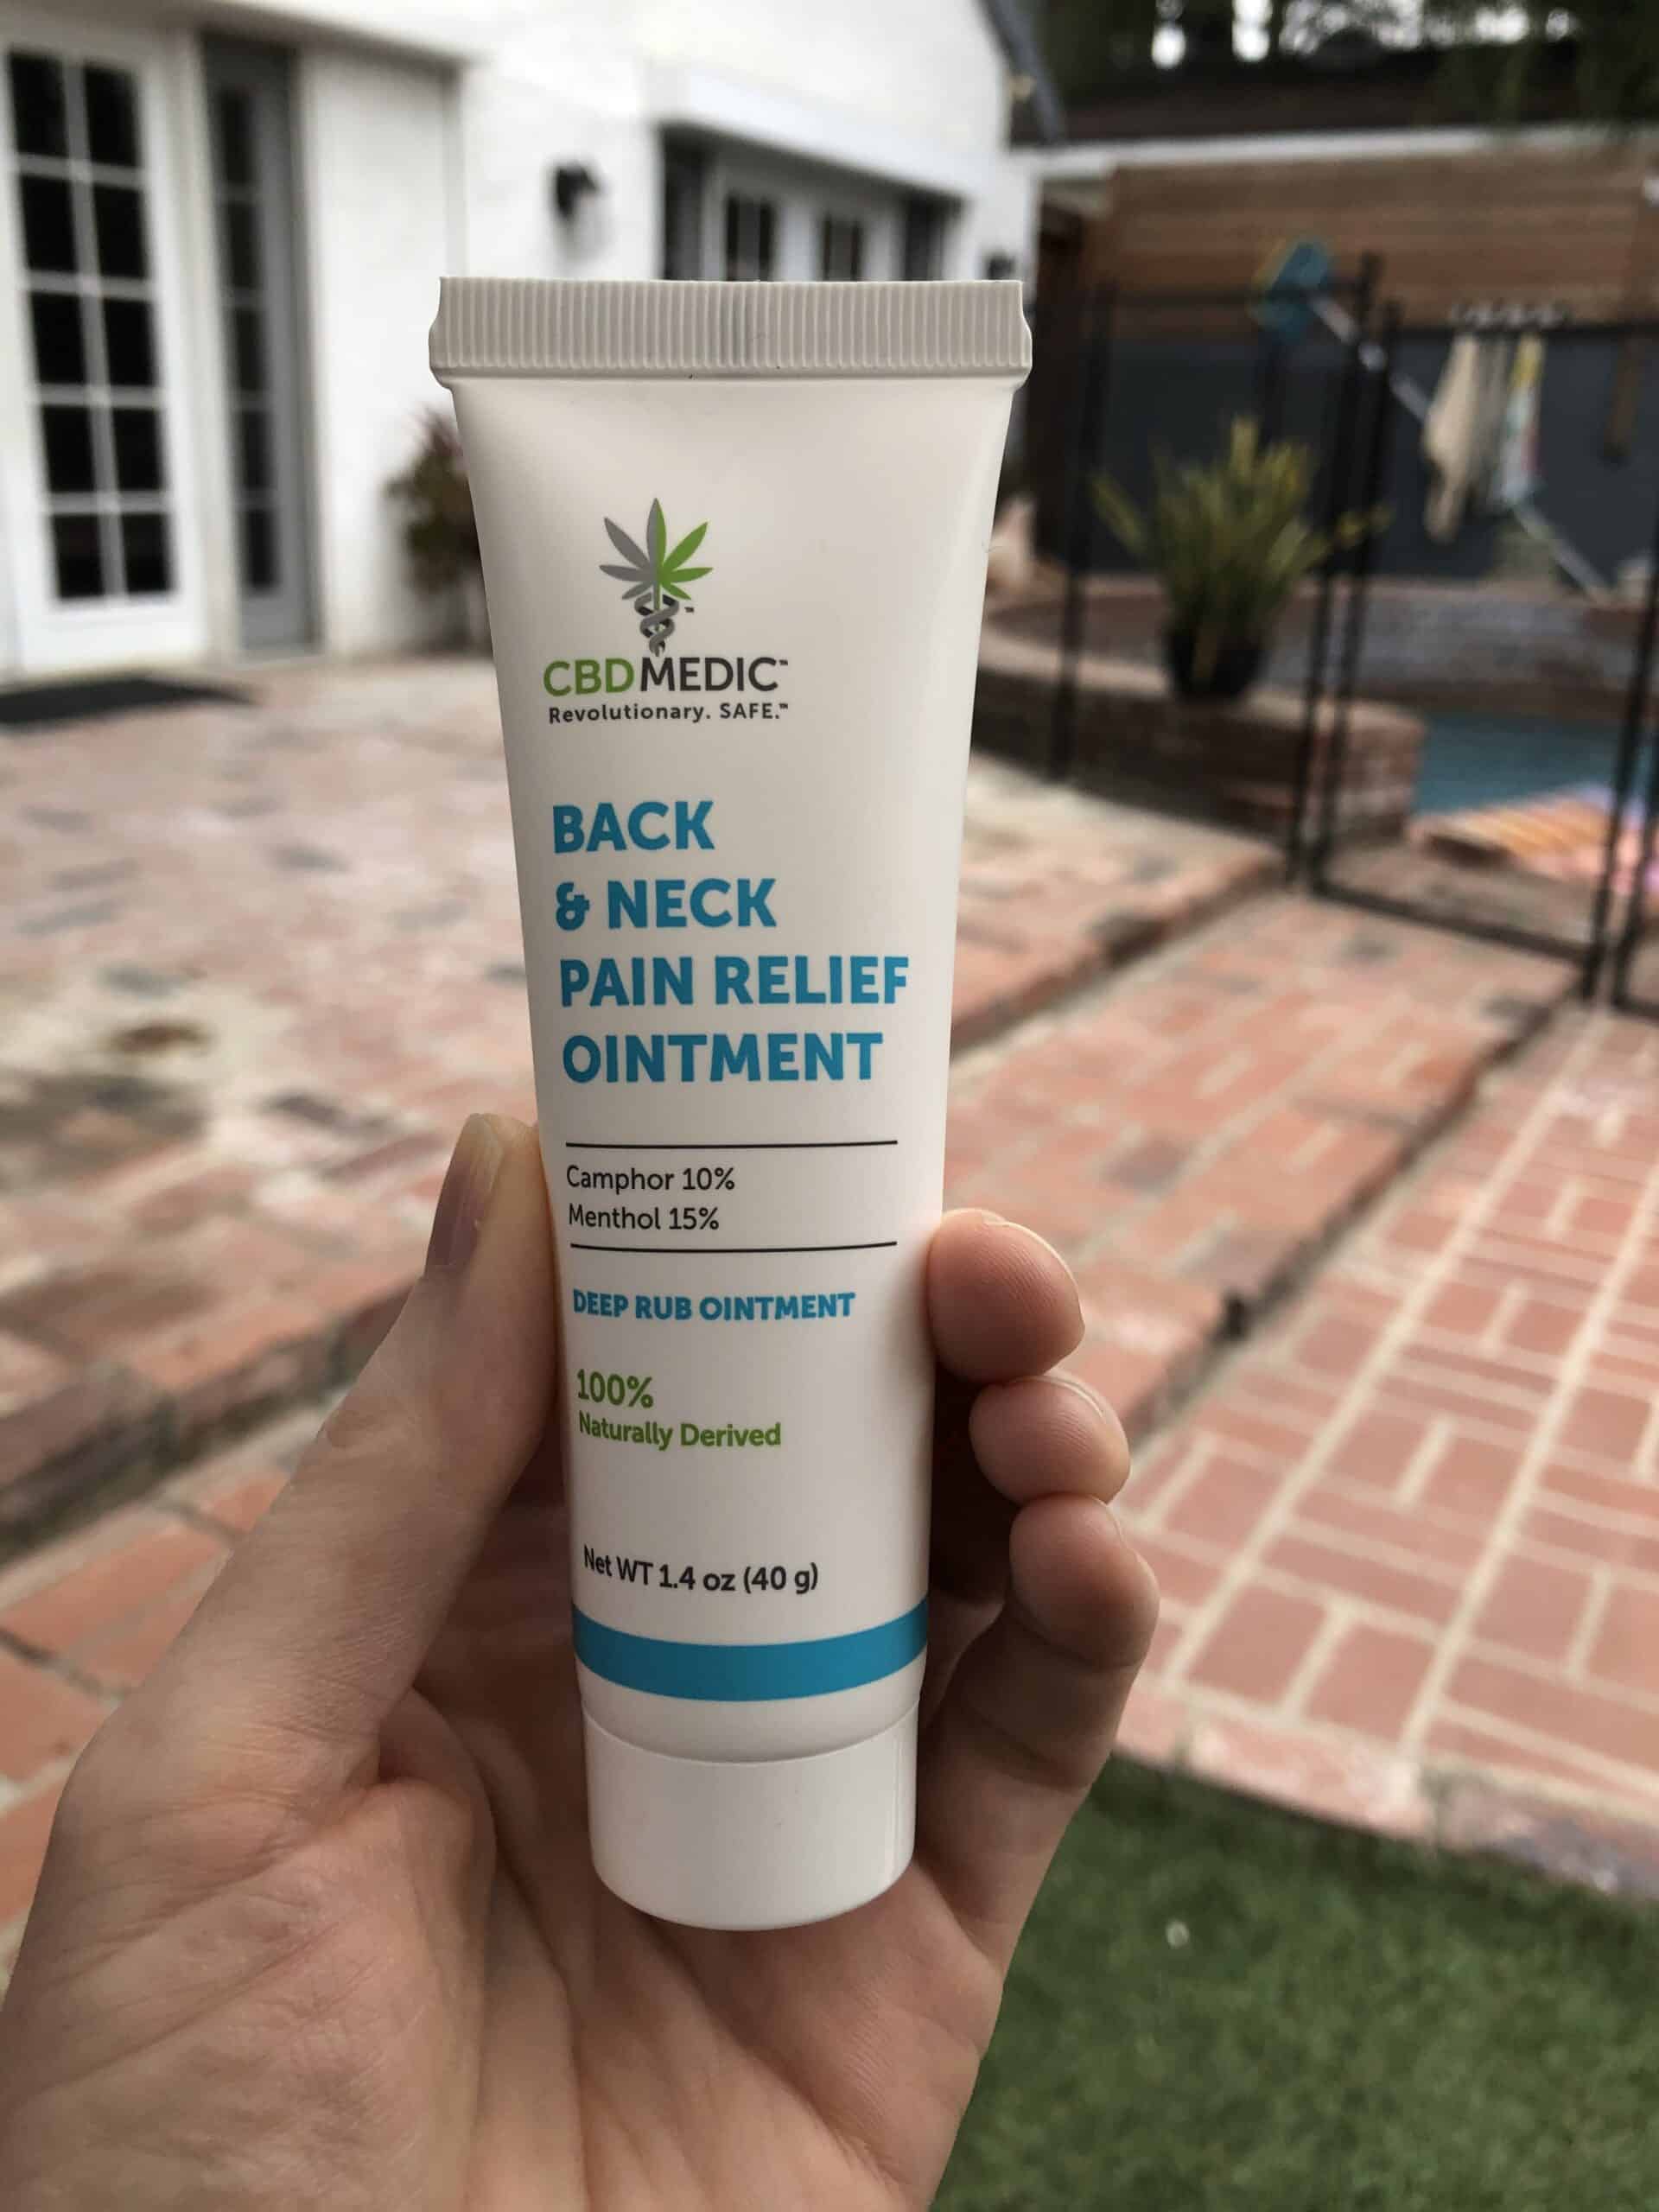 cbdmedic back and neck pain relief ointment save on cannabis beauty shot